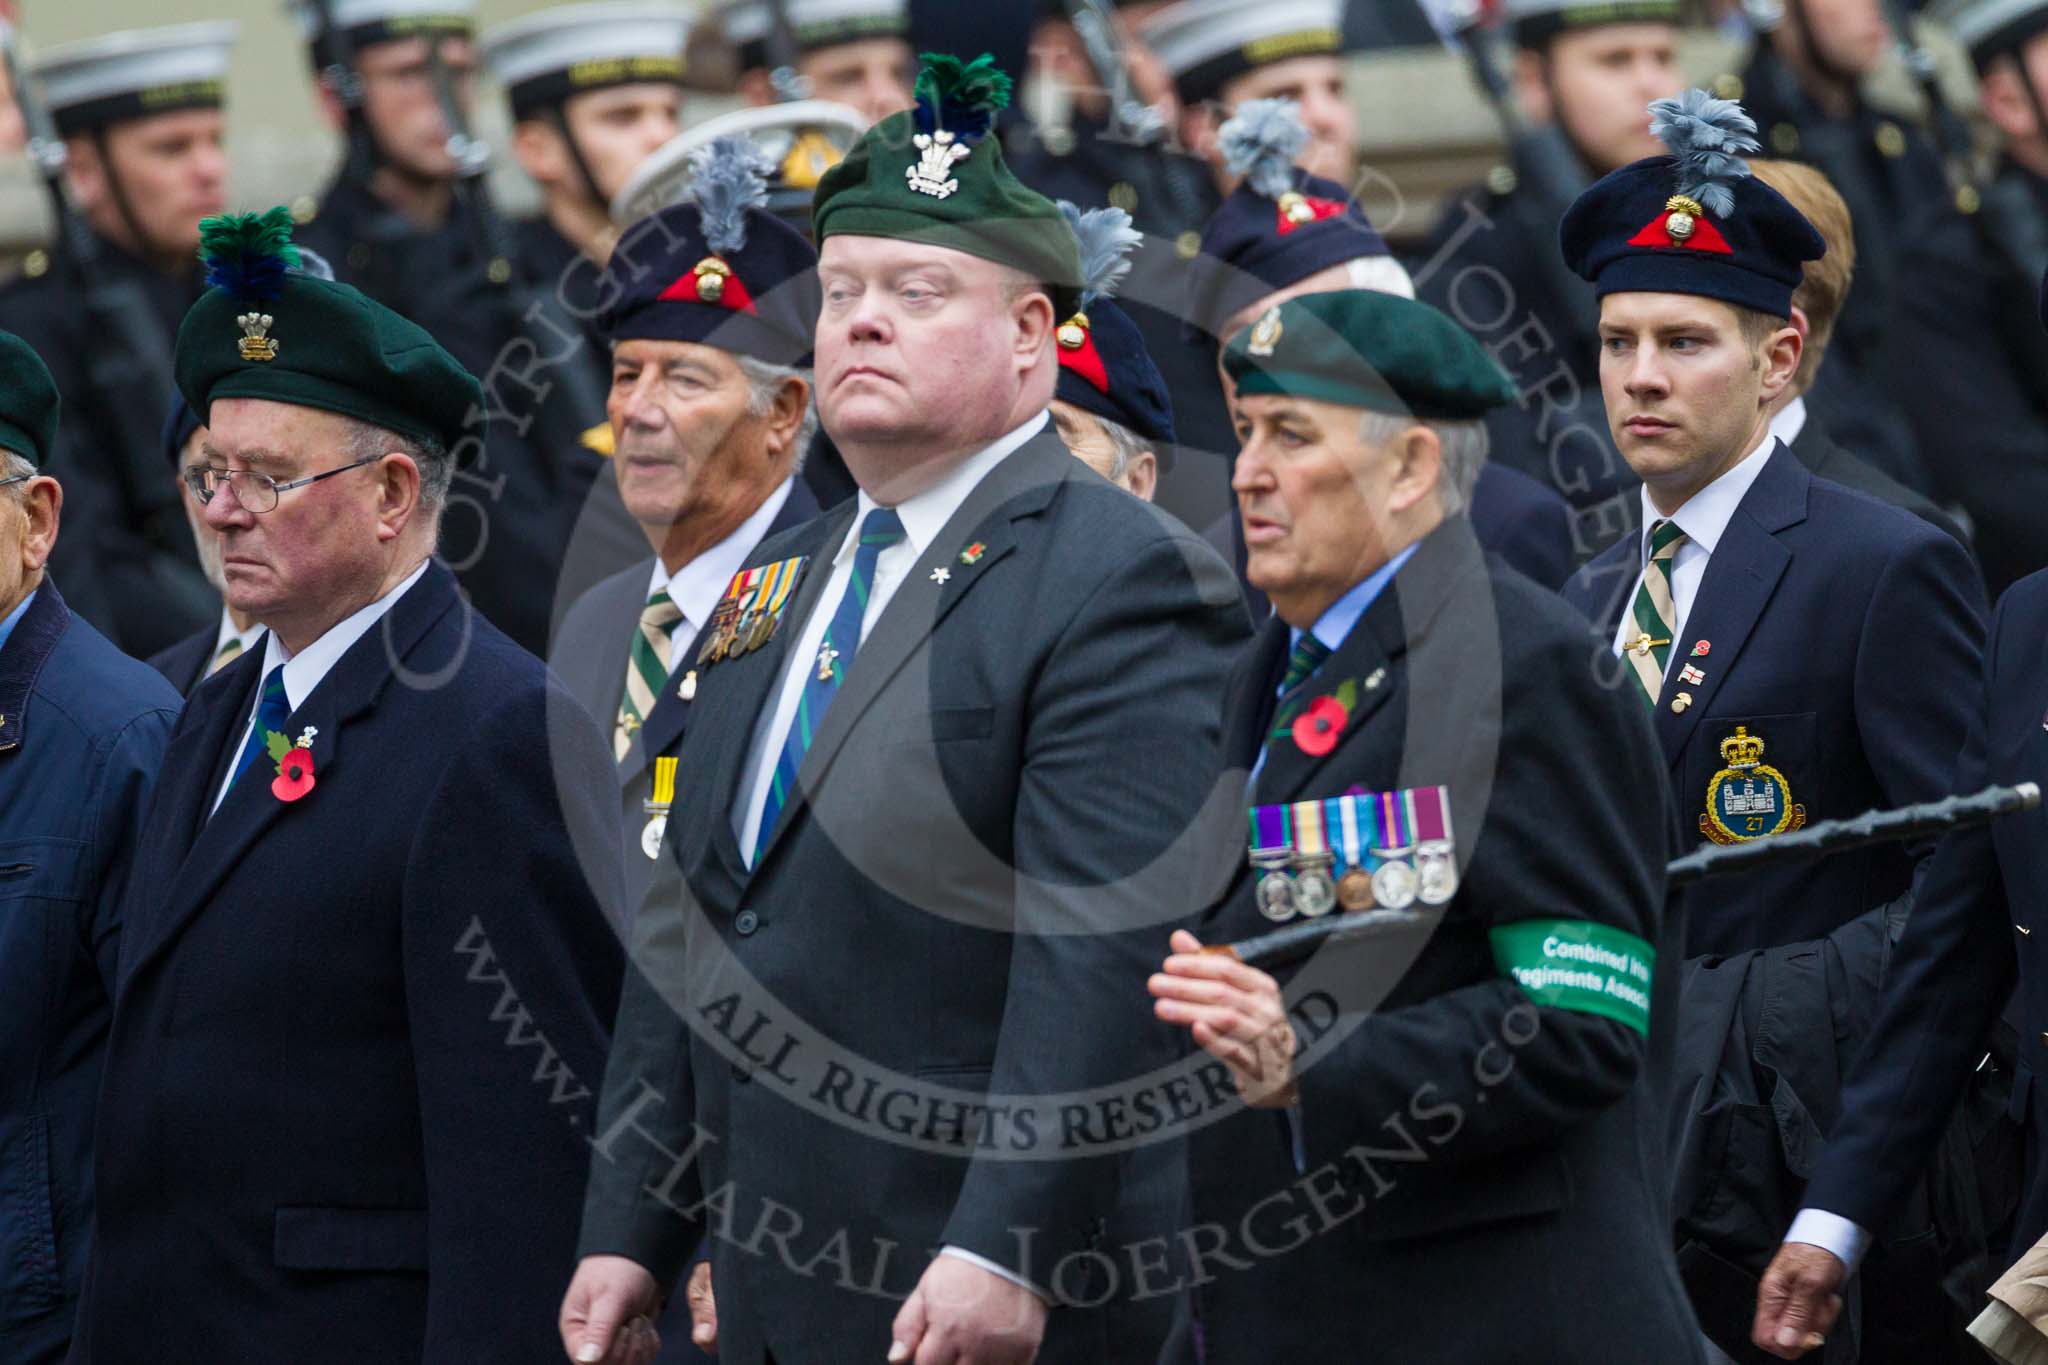 Remembrance Sunday at the Cenotaph 2015: Group D5, North Irish Horse & Irish Regiments Old Comrades
Association.
Cenotaph, Whitehall, London SW1,
London,
Greater London,
United Kingdom,
on 08 November 2015 at 11:52, image #612